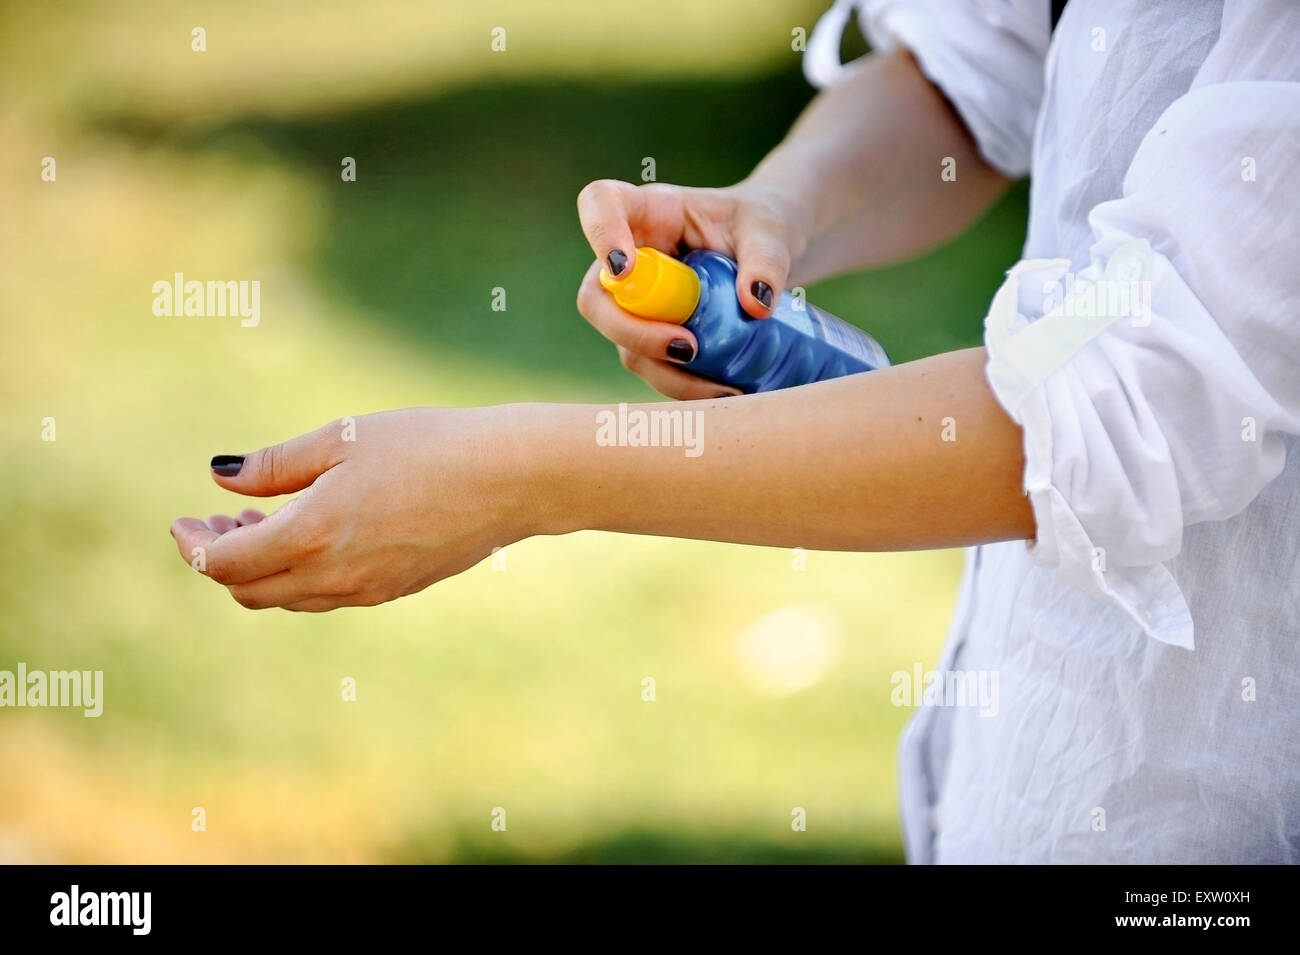 Hands of a woman using a blue bottle of sunscreen Stock Photo